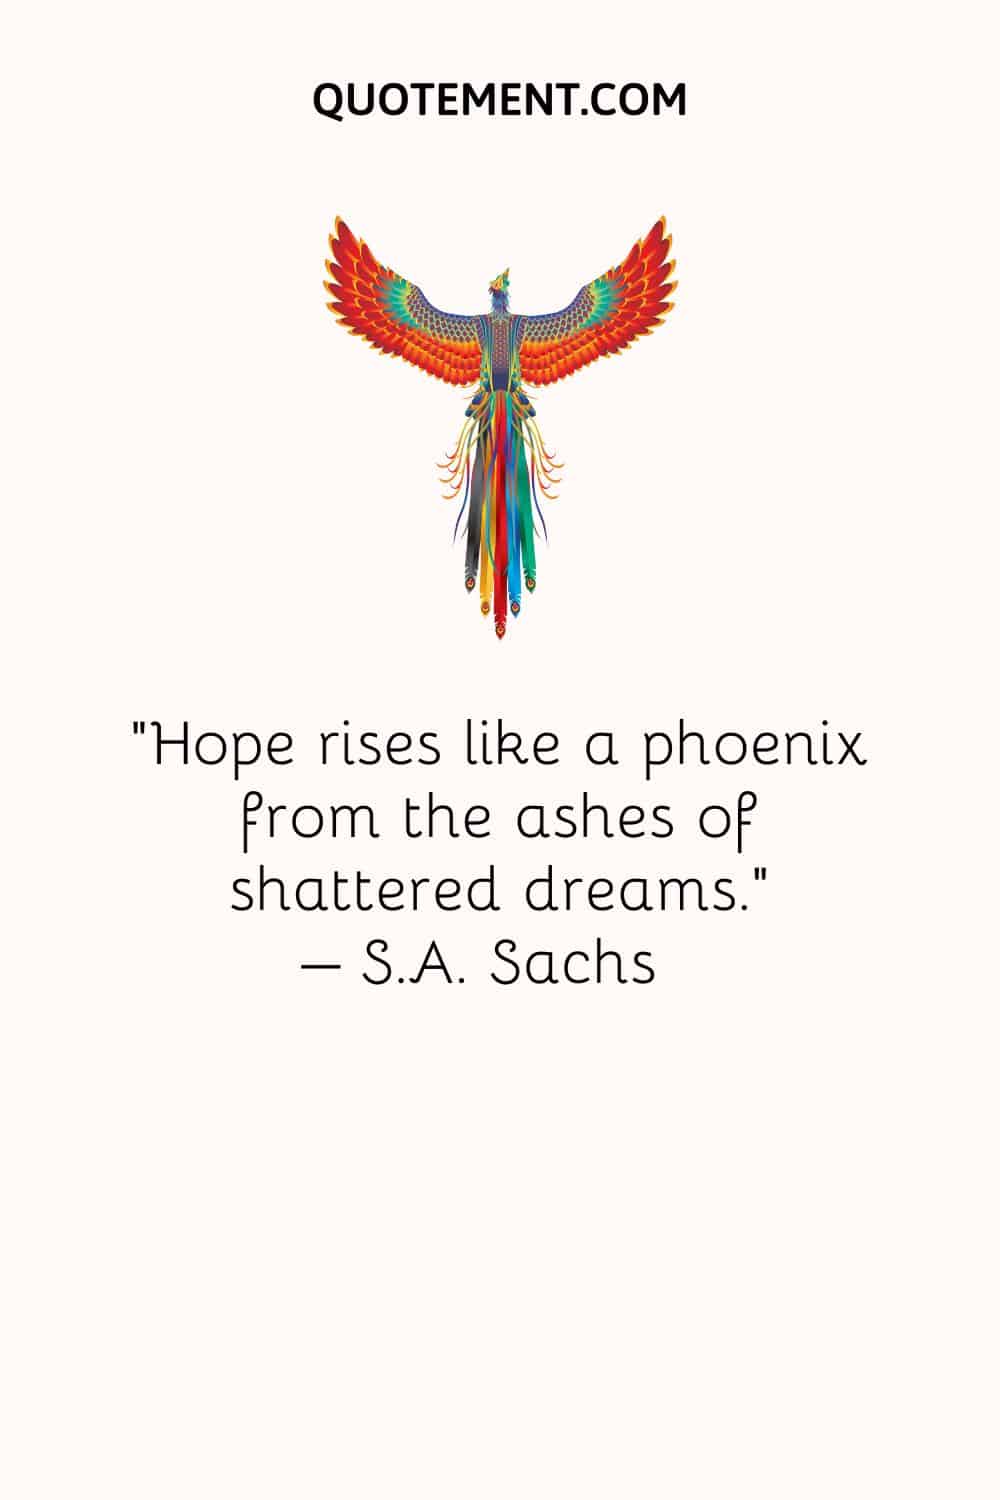 Hope rises like a phoenix from the ashes of shattered dreams.